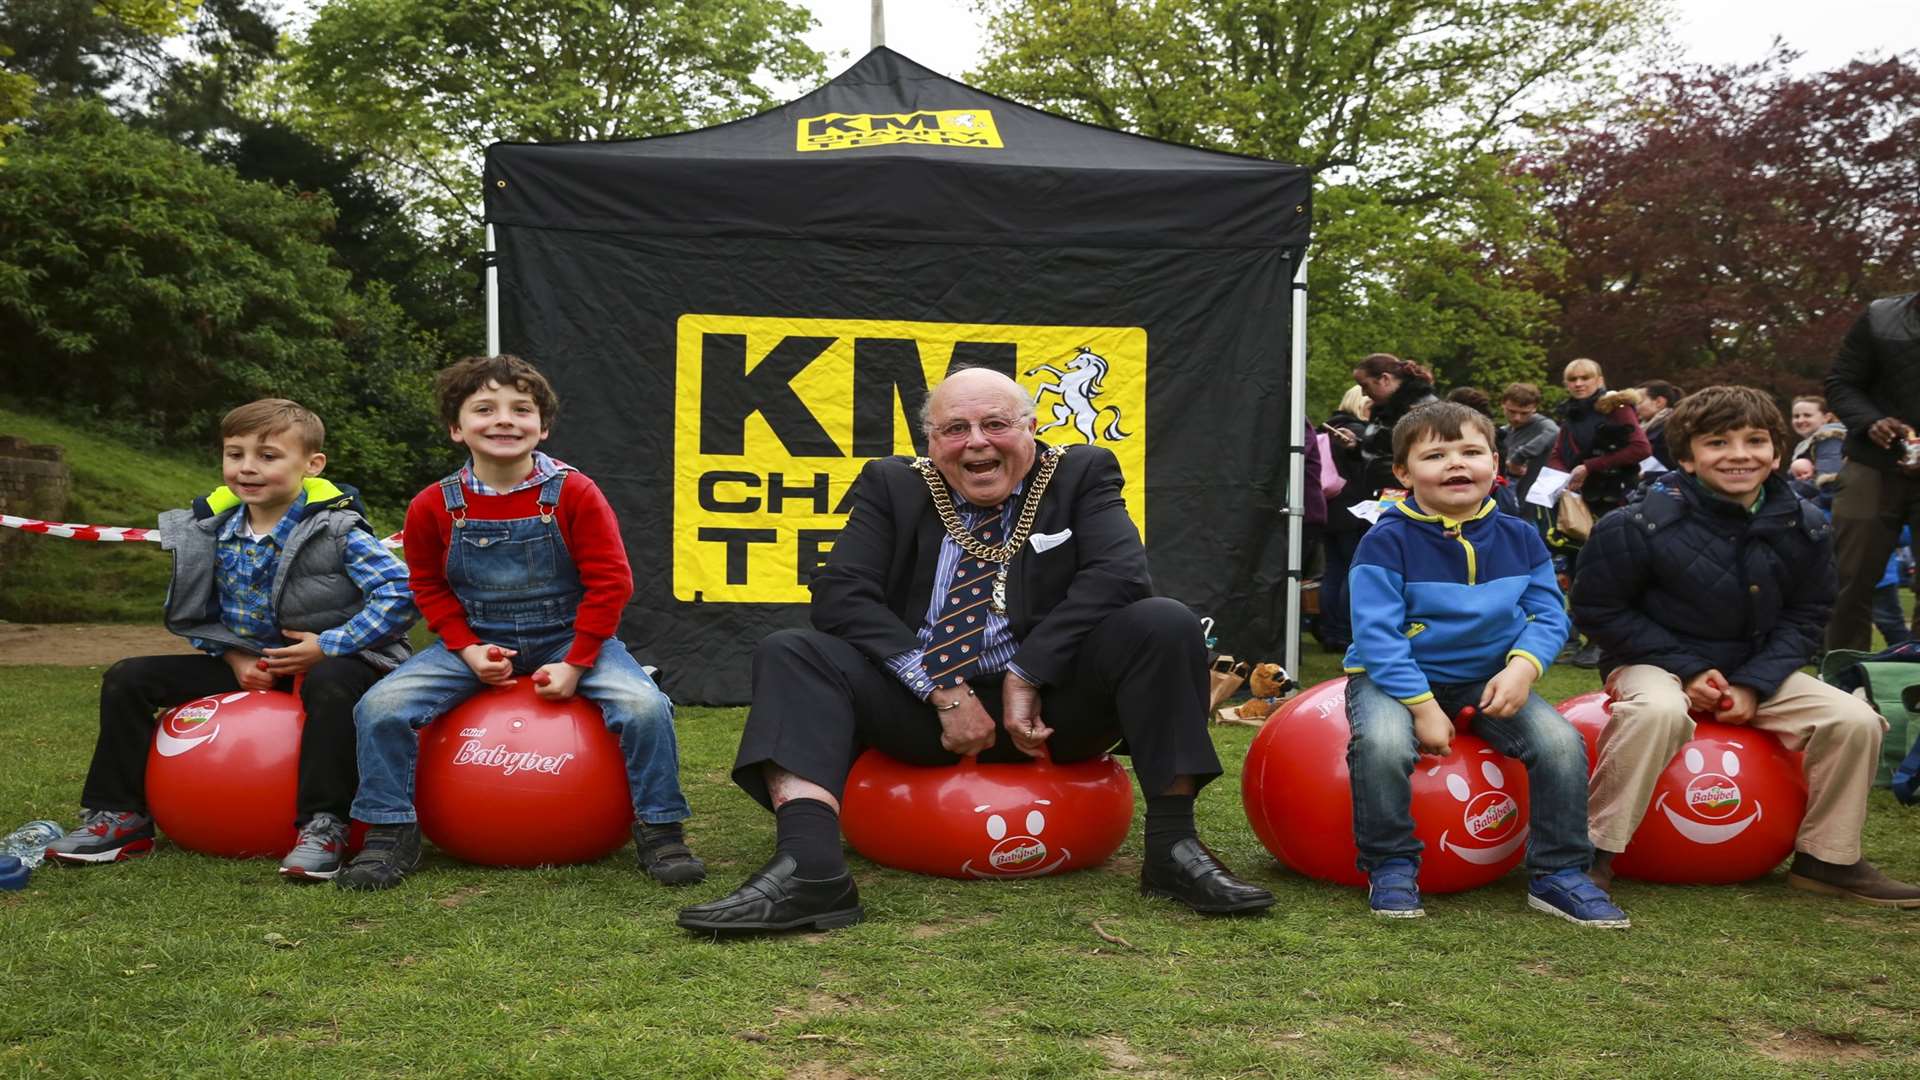 The Worshipful Lord Mayor of Canterbury, Cllr George Metcalfe tries out the space hopper challenge at Buster's Big Bash 2017.